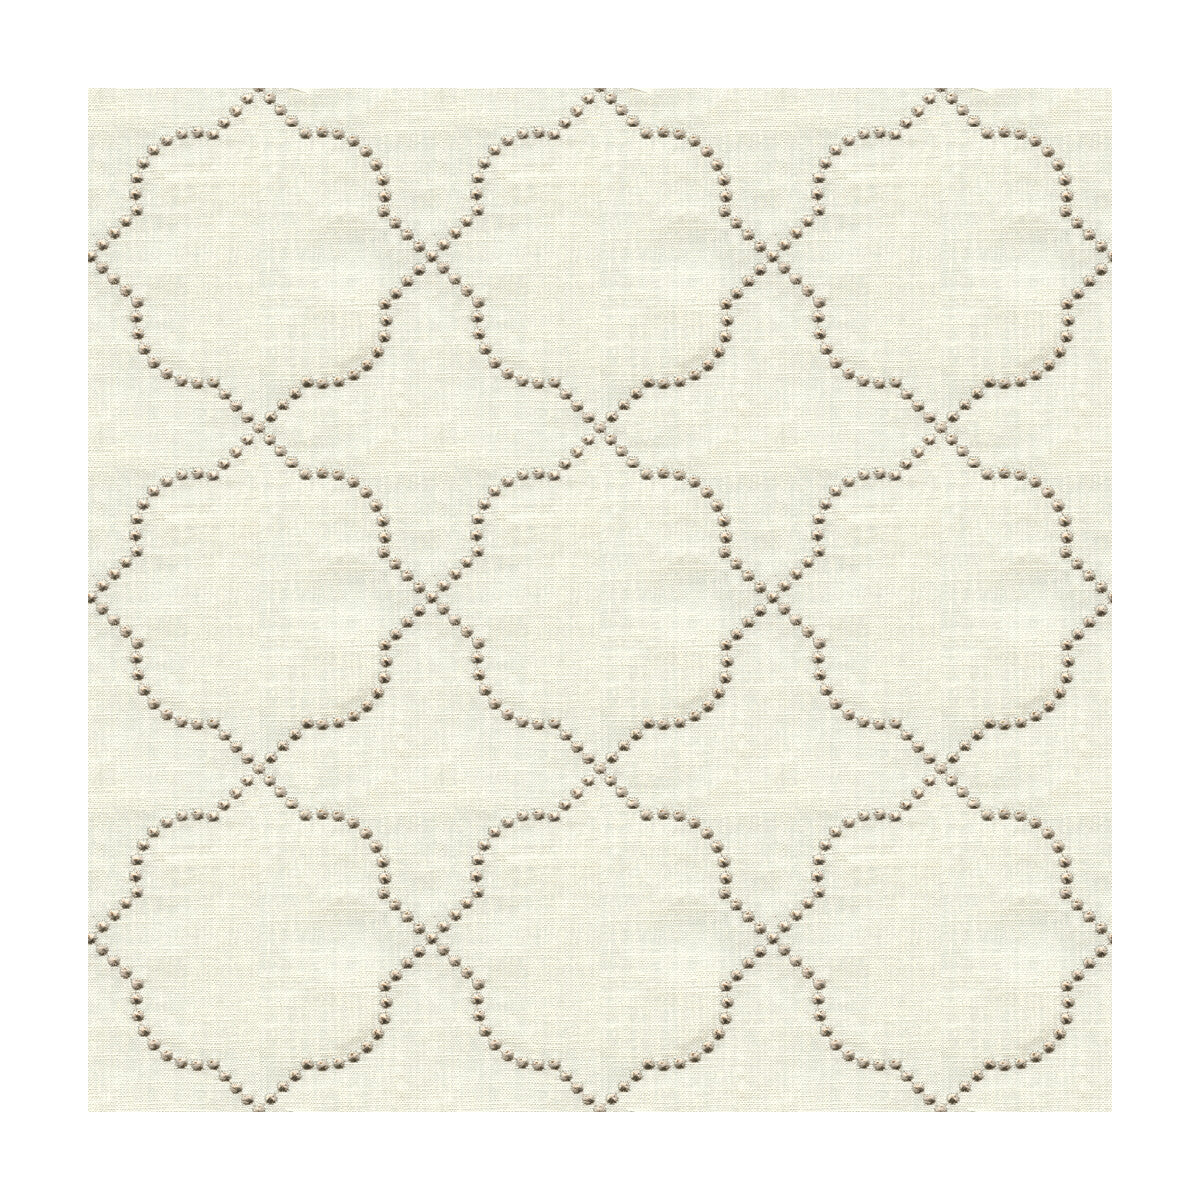 Tabari fabric in stone color - pattern 4072.11.0 - by Kravet Design in the Constantinople collection